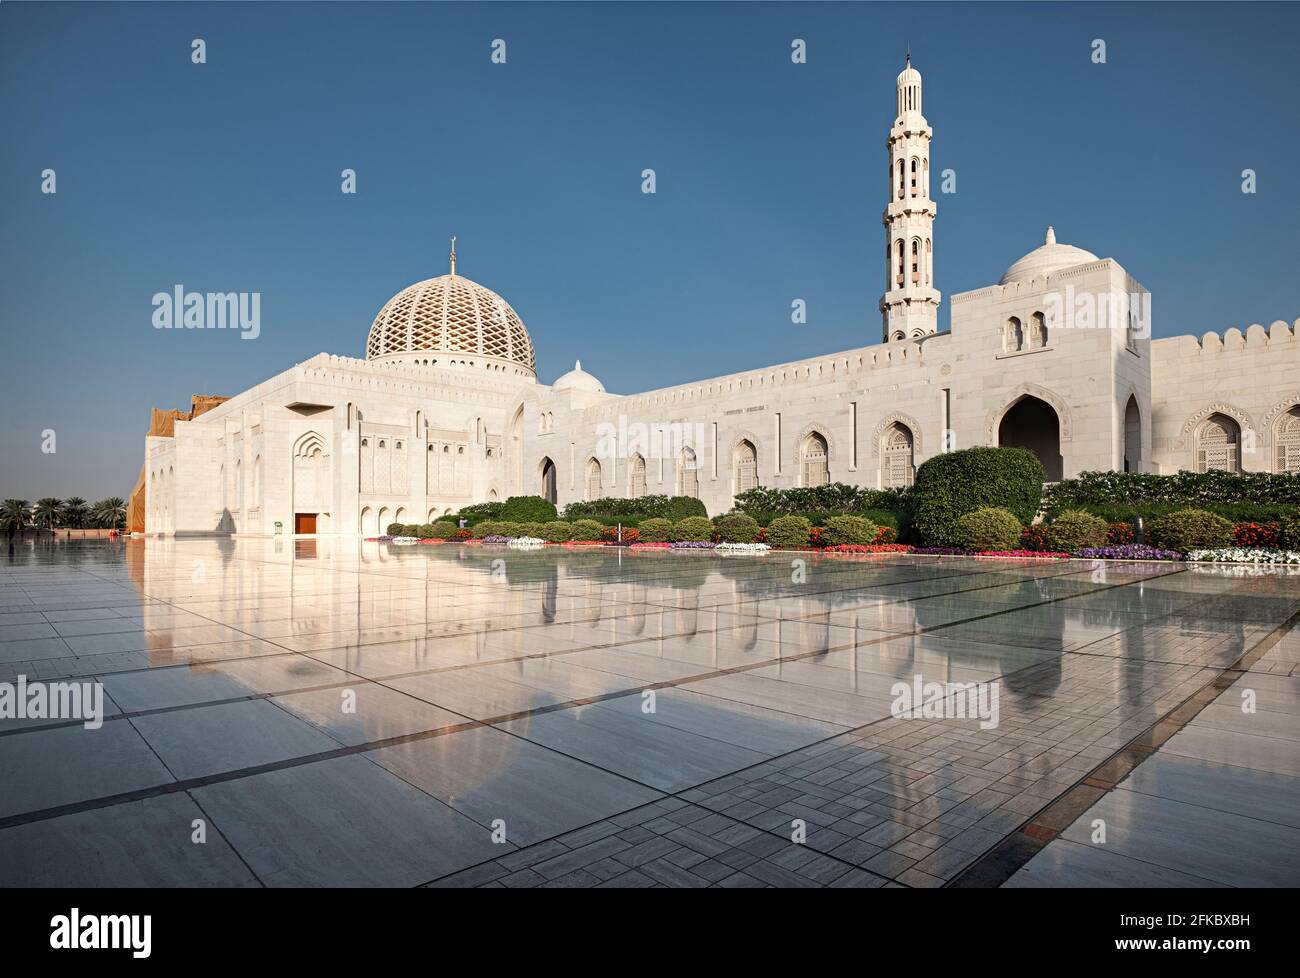 Sultan Qaboos Mosque reflected in the shiny marble floor, Muscat, Oman, Middle East Stock Photo